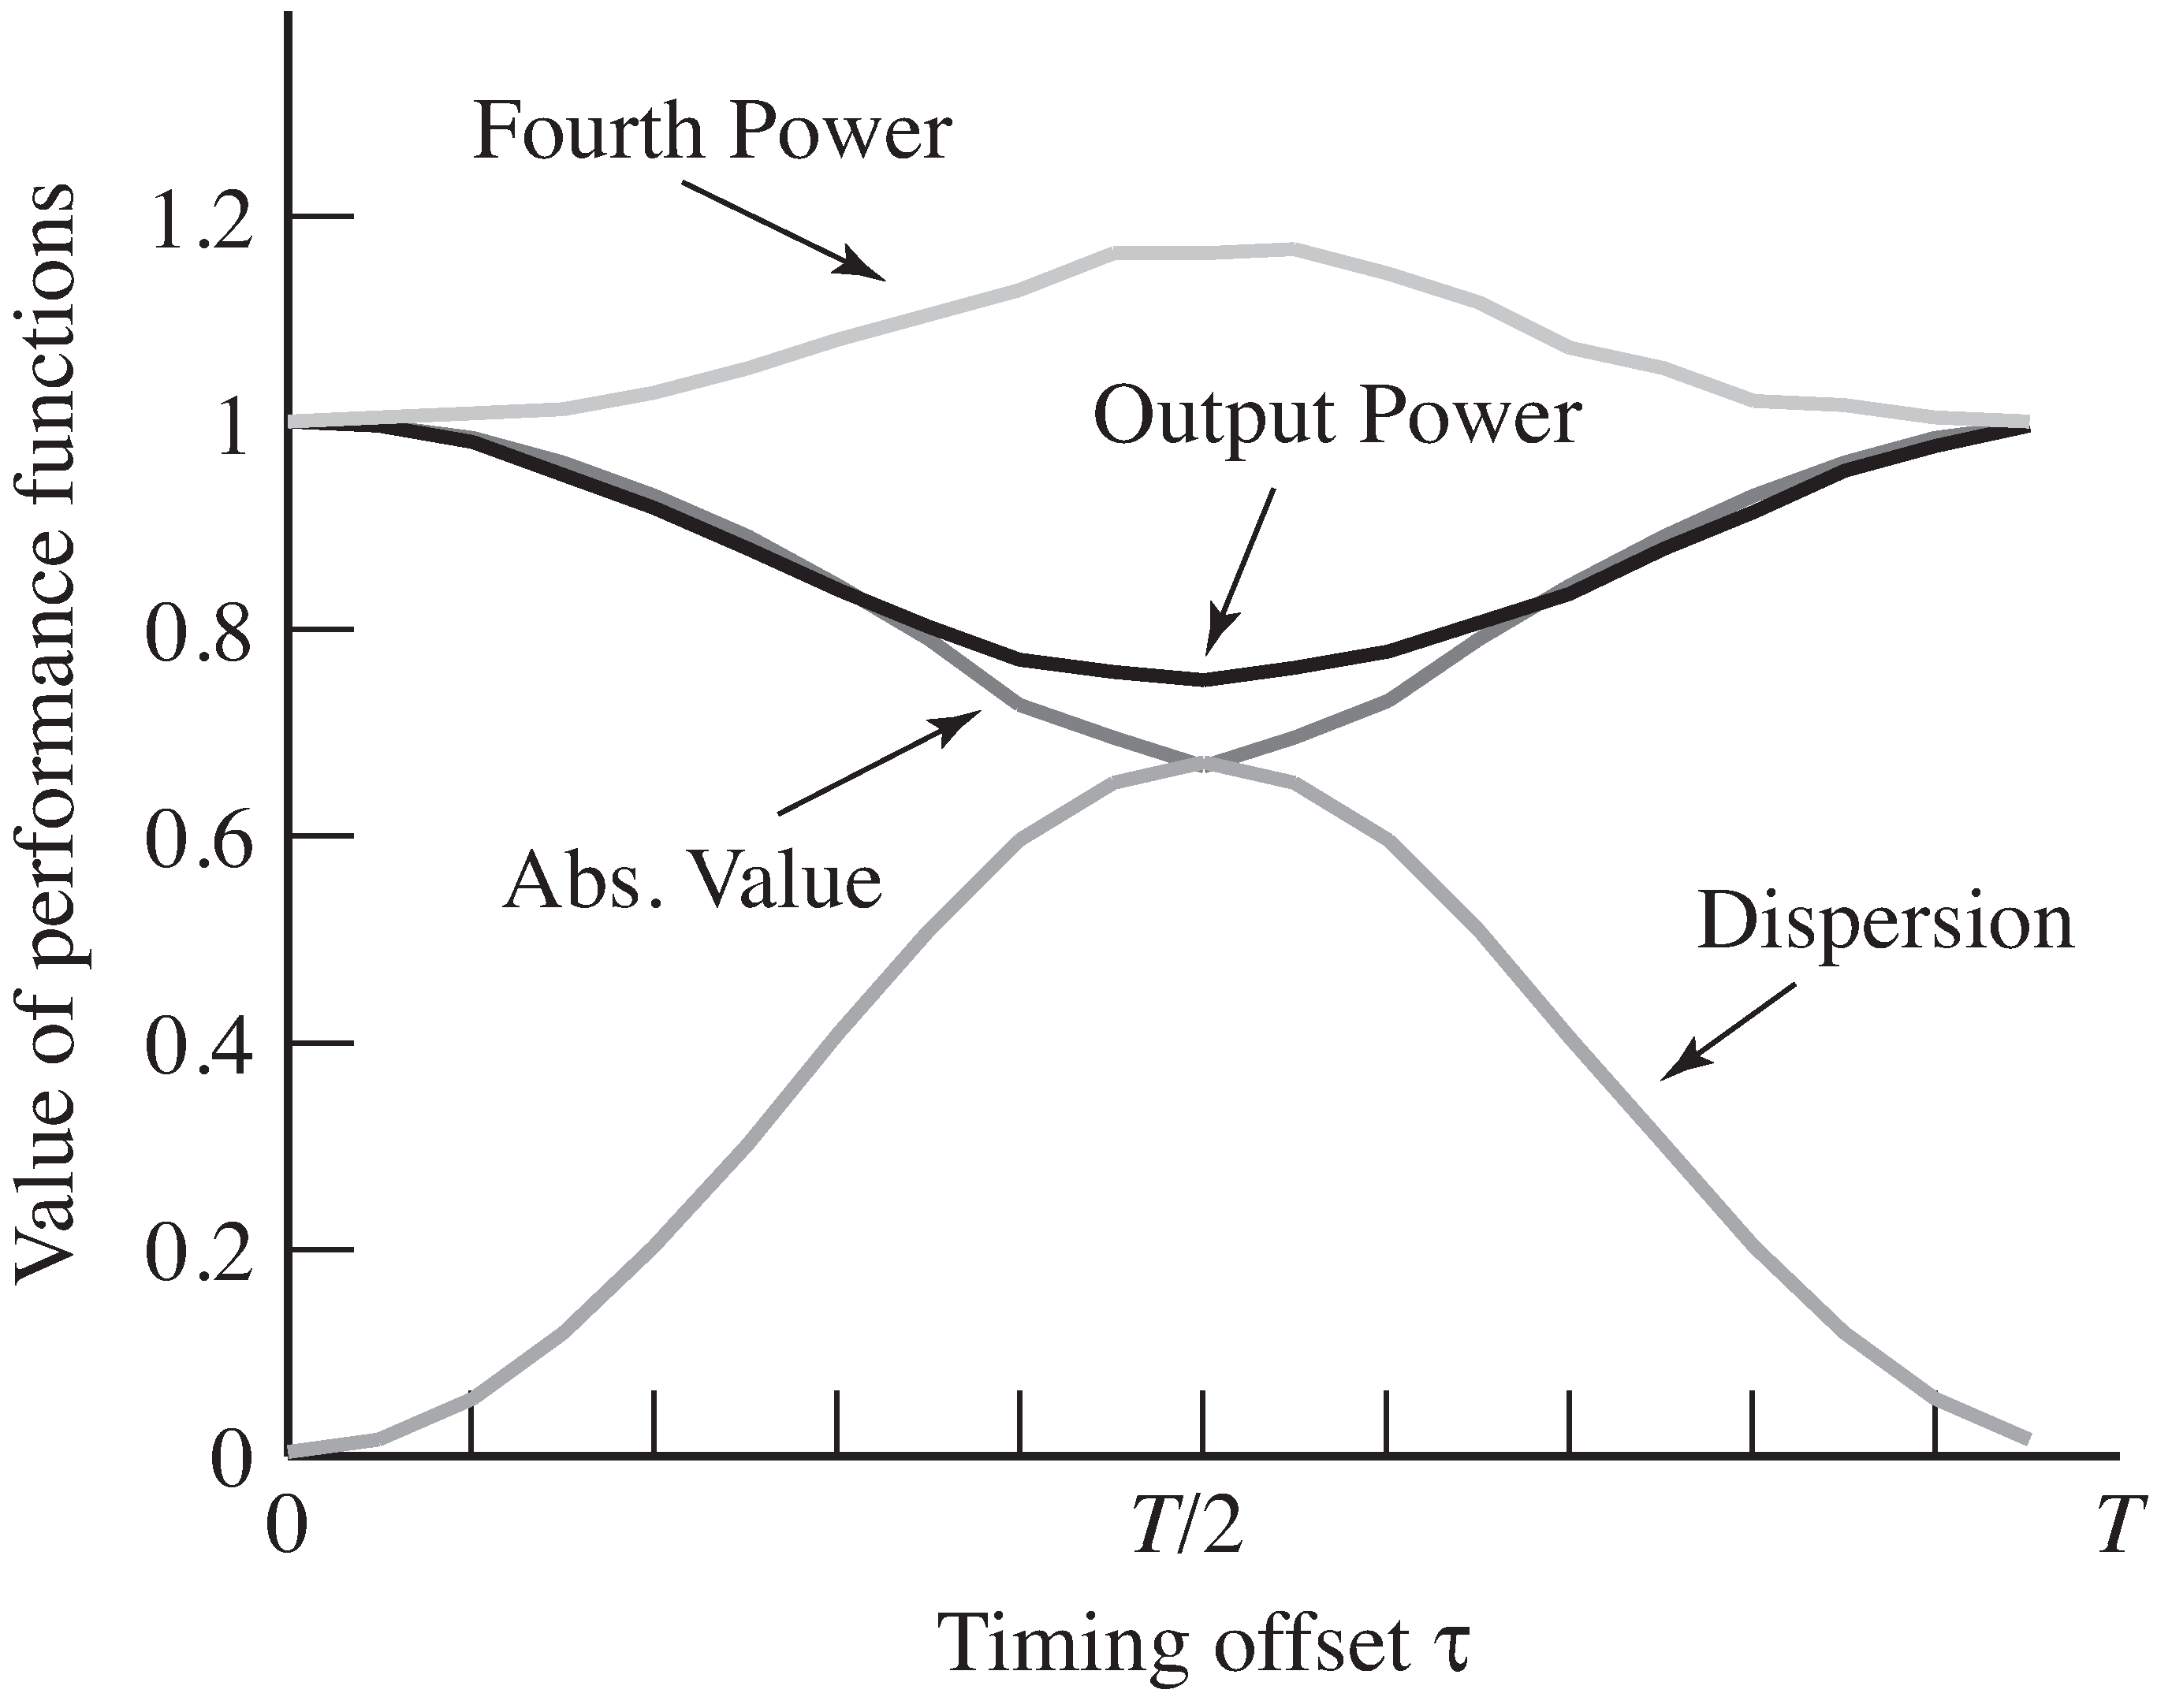 Four performance functions that can be used for timing recovery, plotted as a function of the timing offset τ. In this figure, the optimal answer is at τ=0. Some of the performance functions must be minimized and some must be maximized.